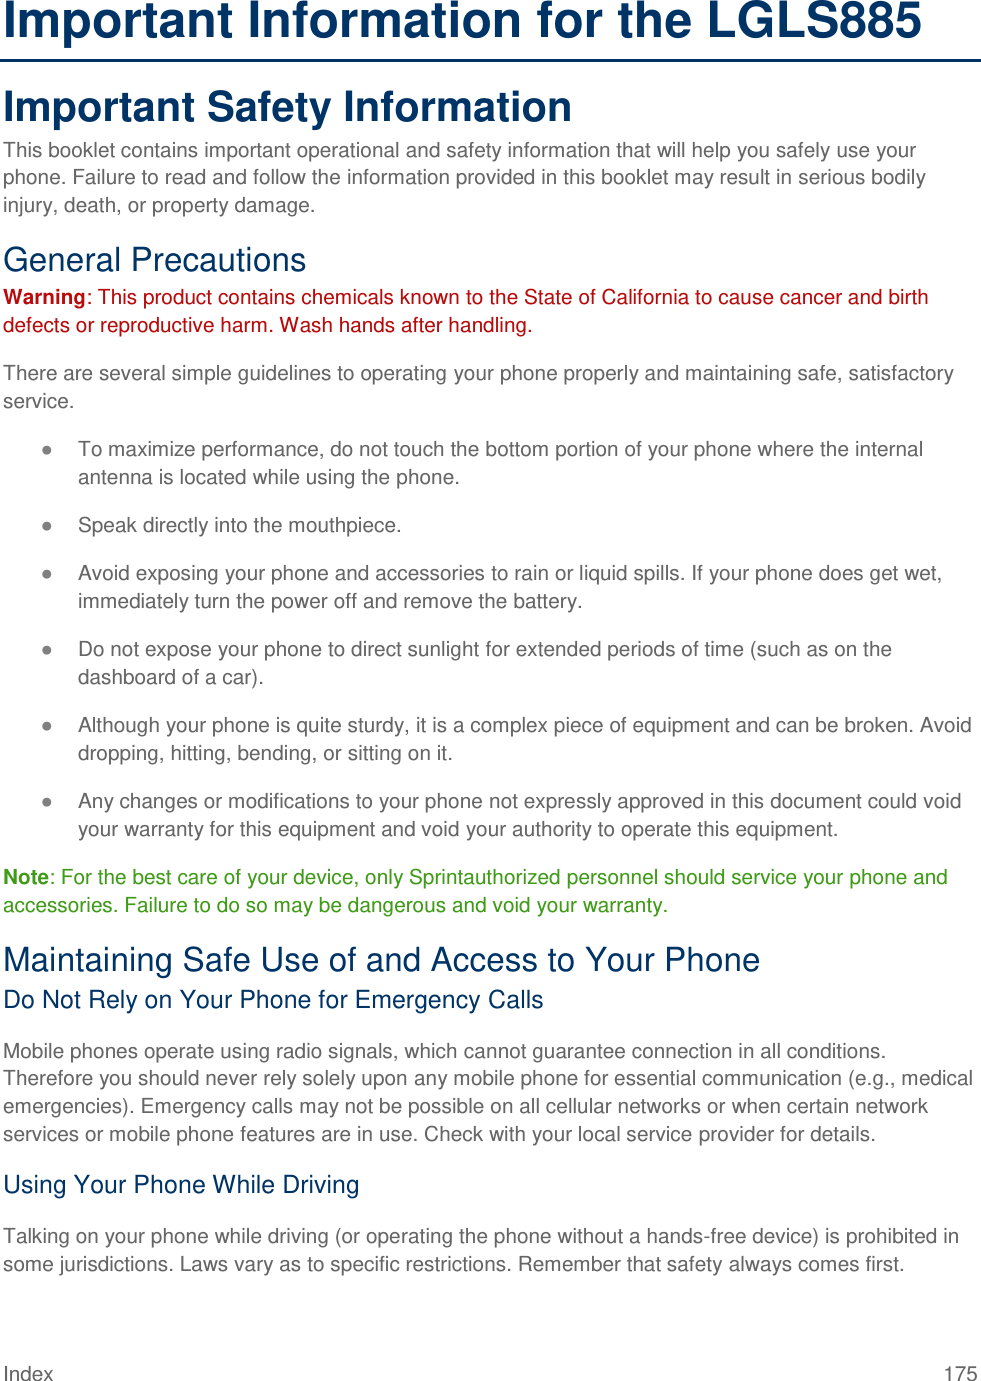 Index 175 Important Information for the LGLS885 Important Safety Information This booklet contains important operational and safety information that will help you safely use your phone. Failure to read and follow the information provided in this booklet may result in serious bodily injury, death, or property damage. General Precautions Warning: This product contains chemicals known to the State of California to cause cancer and birth defects or reproductive harm. Wash hands after handling. There are several simple guidelines to operating your phone properly and maintaining safe, satisfactory service. ● To maximize performance, do not touch the bottom portion of your phone where the internal antenna is located while using the phone. ● Speak directly into the mouthpiece. ● Avoid exposing your phone and accessories to rain or liquid spills. If your phone does get wet, immediately turn the power off and remove the battery. ● Do not expose your phone to direct sunlight for extended periods of time (such as on the dashboard of a car). ● Although your phone is quite sturdy, it is a complex piece of equipment and can be broken. Avoid dropping, hitting, bending, or sitting on it. ● Any changes or modifications to your phone not expressly approved in this document could void your warranty for this equipment and void your authority to operate this equipment. Note: For the best care of your device, only Sprintauthorized personnel should service your phone and accessories. Failure to do so may be dangerous and void your warranty. Maintaining Safe Use of and Access to Your Phone Do Not Rely on Your Phone for Emergency Calls Mobile phones operate using radio signals, which cannot guarantee connection in all conditions. Therefore you should never rely solely upon any mobile phone for essential communication (e.g., medical emergencies). Emergency calls may not be possible on all cellular networks or when certain network services or mobile phone features are in use. Check with your local service provider for details. Using Your Phone While Driving Talking on your phone while driving (or operating the phone without a hands-free device) is prohibited in some jurisdictions. Laws vary as to specific restrictions. Remember that safety always comes first. 